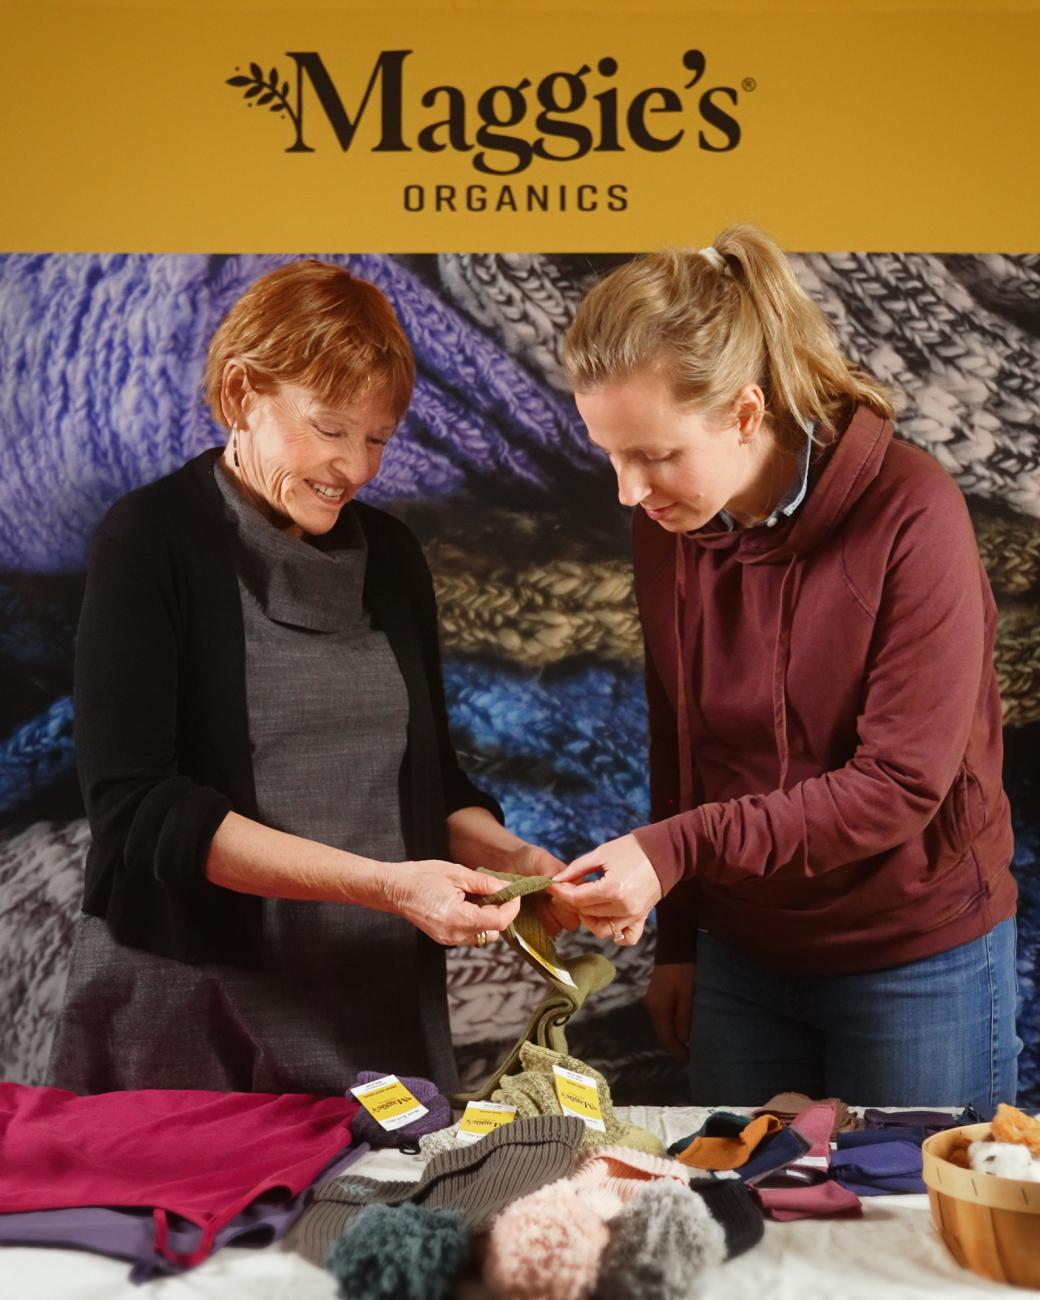 Bená Burda and Sarah Queen look at a pair of socks from the company Maggie's Organics.